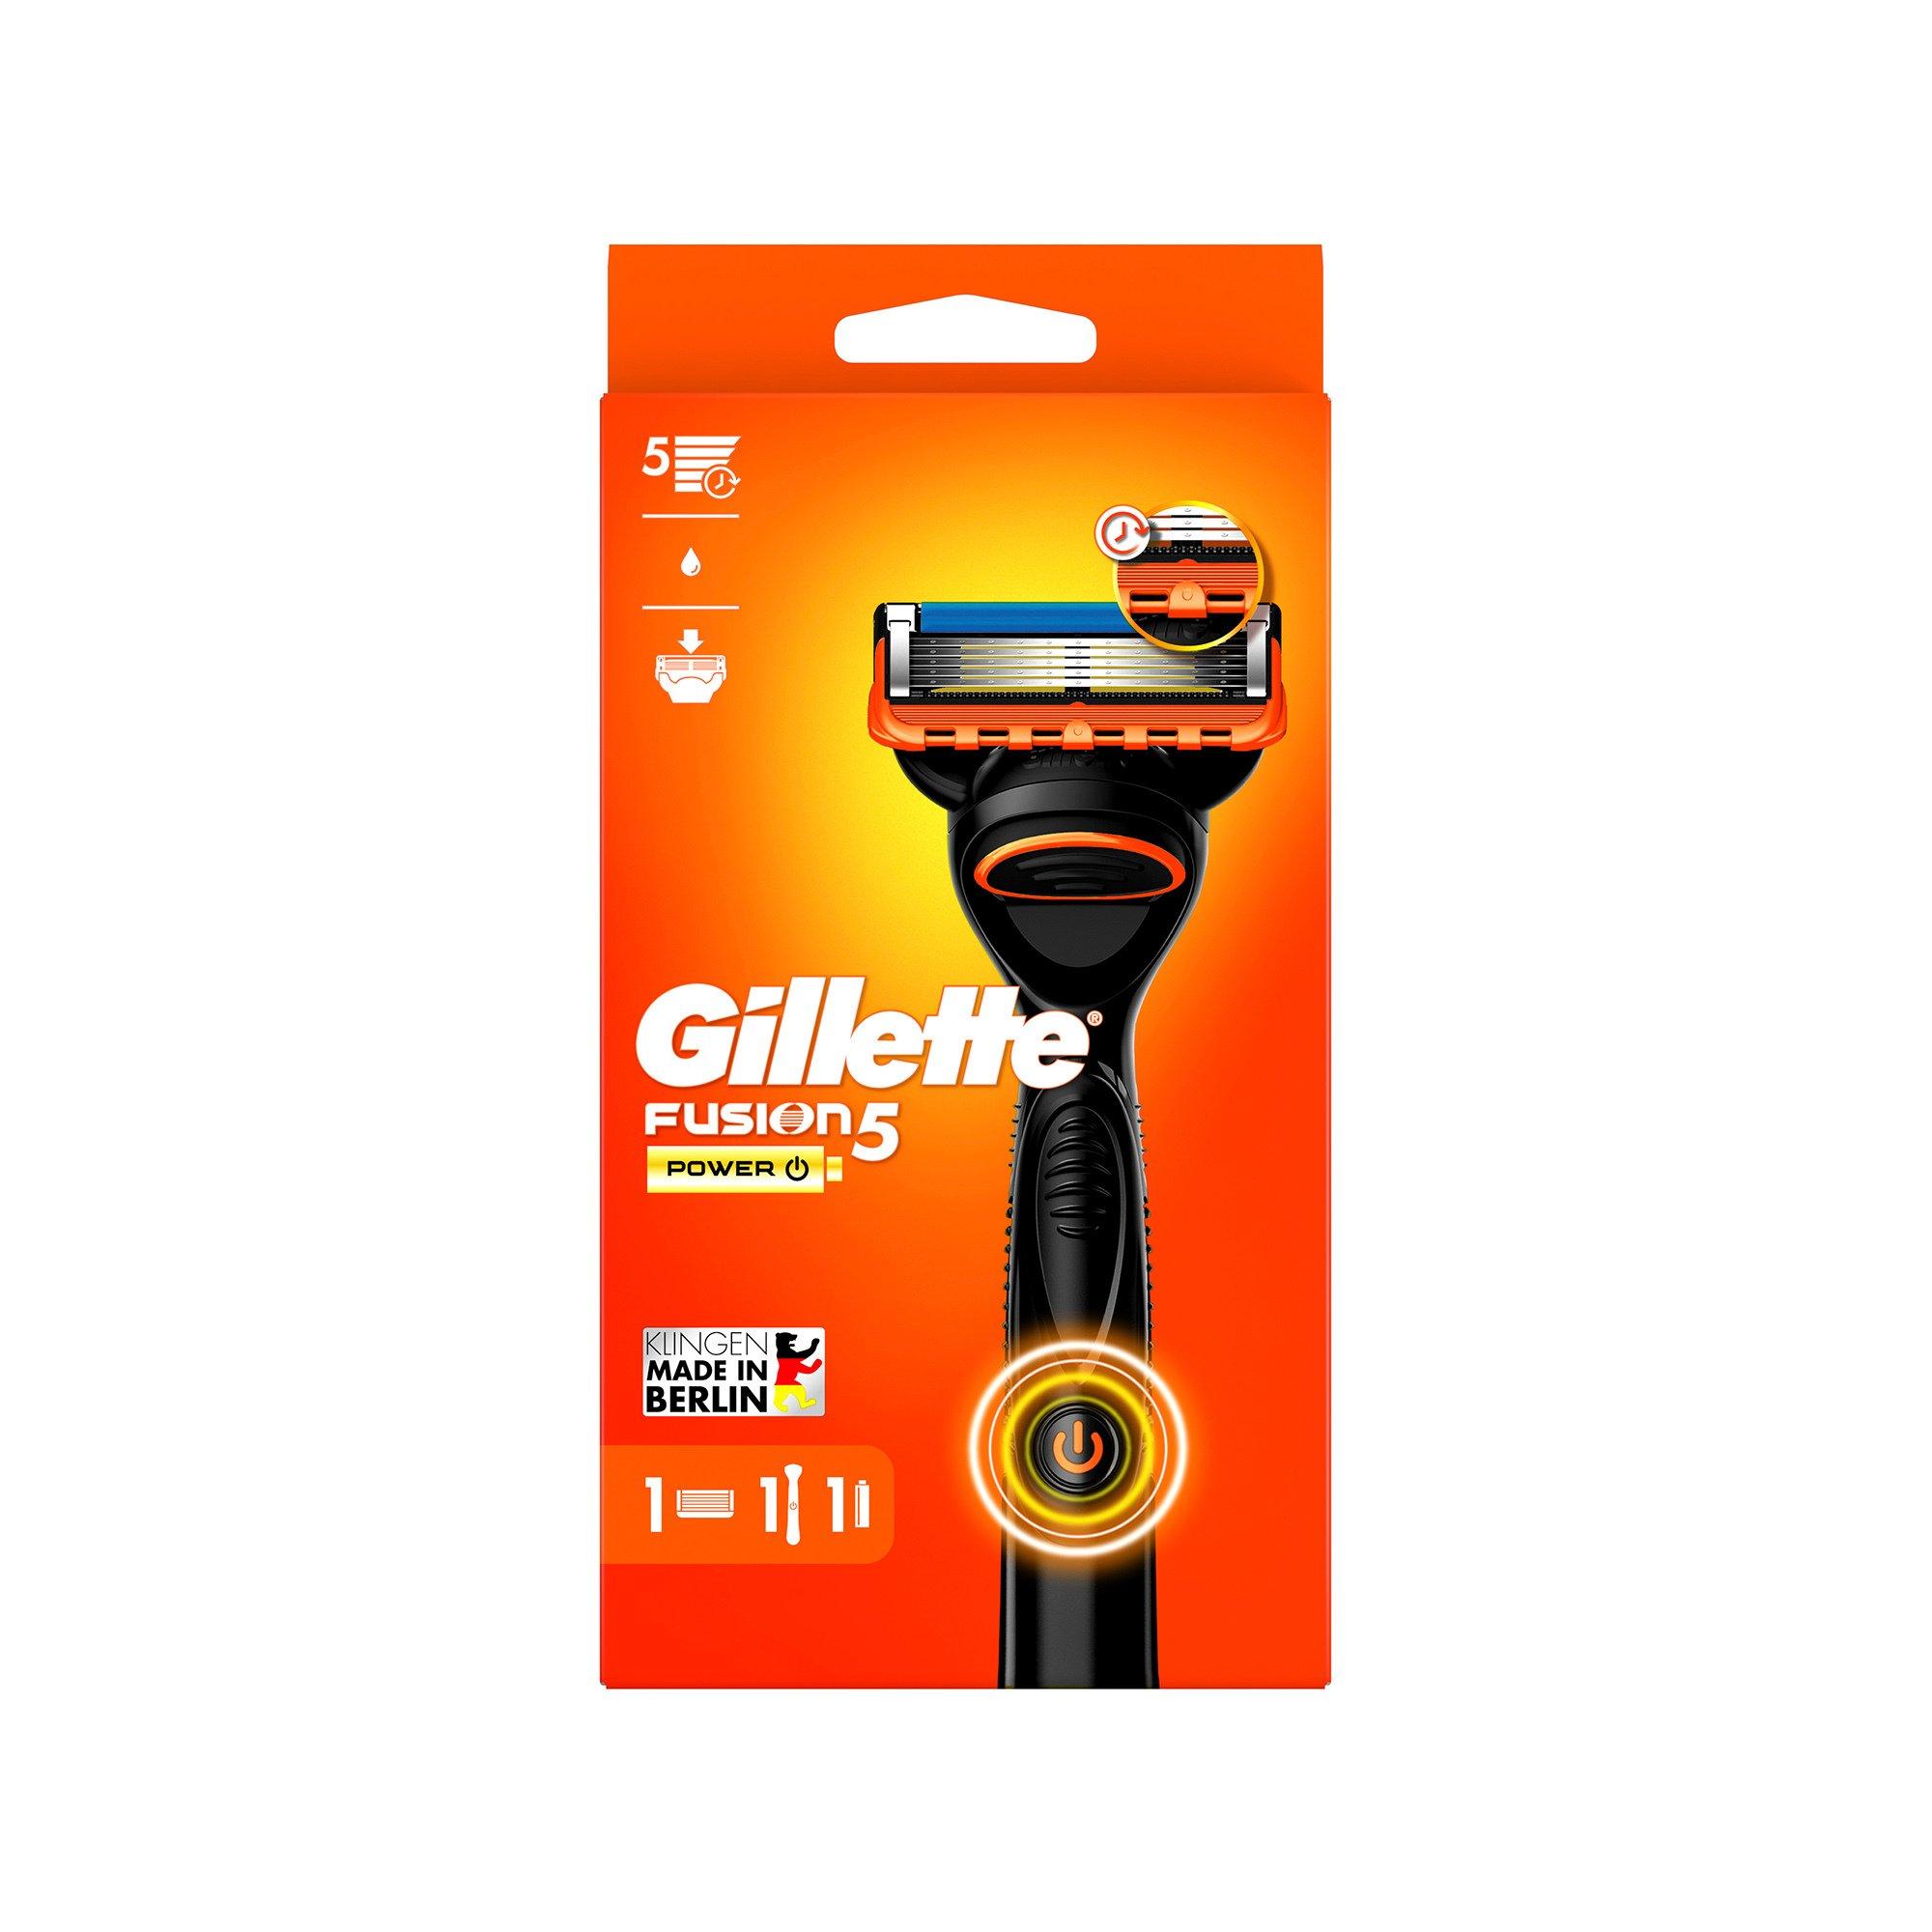 Image of Gillette Fusion5 Power Rasierapparat